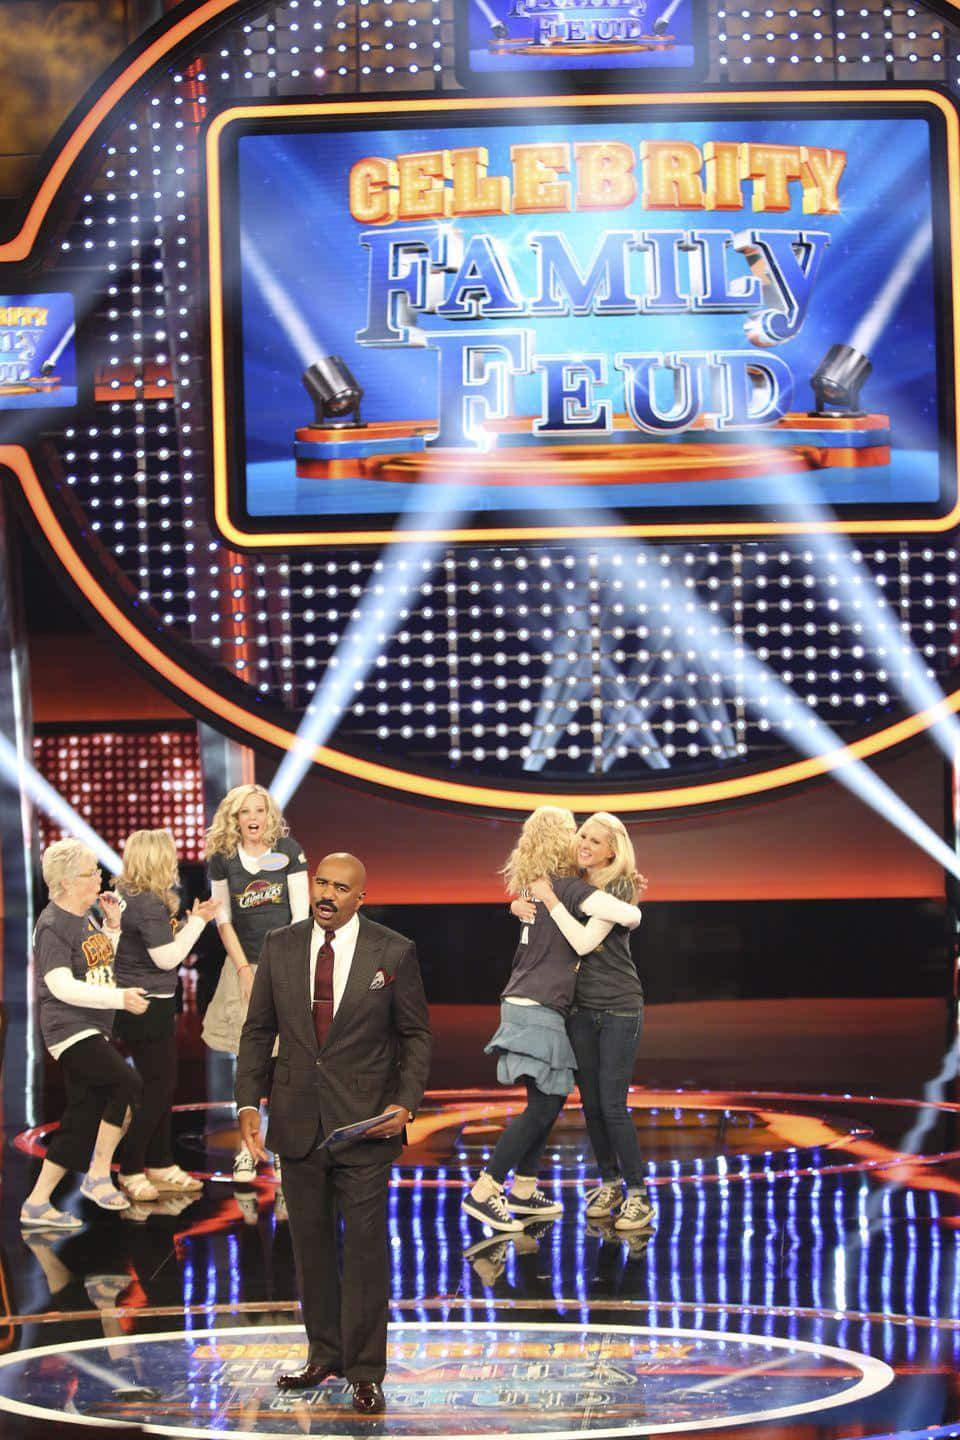 A Group Of People On Stage With A Sign That Says 'the Family Feud'